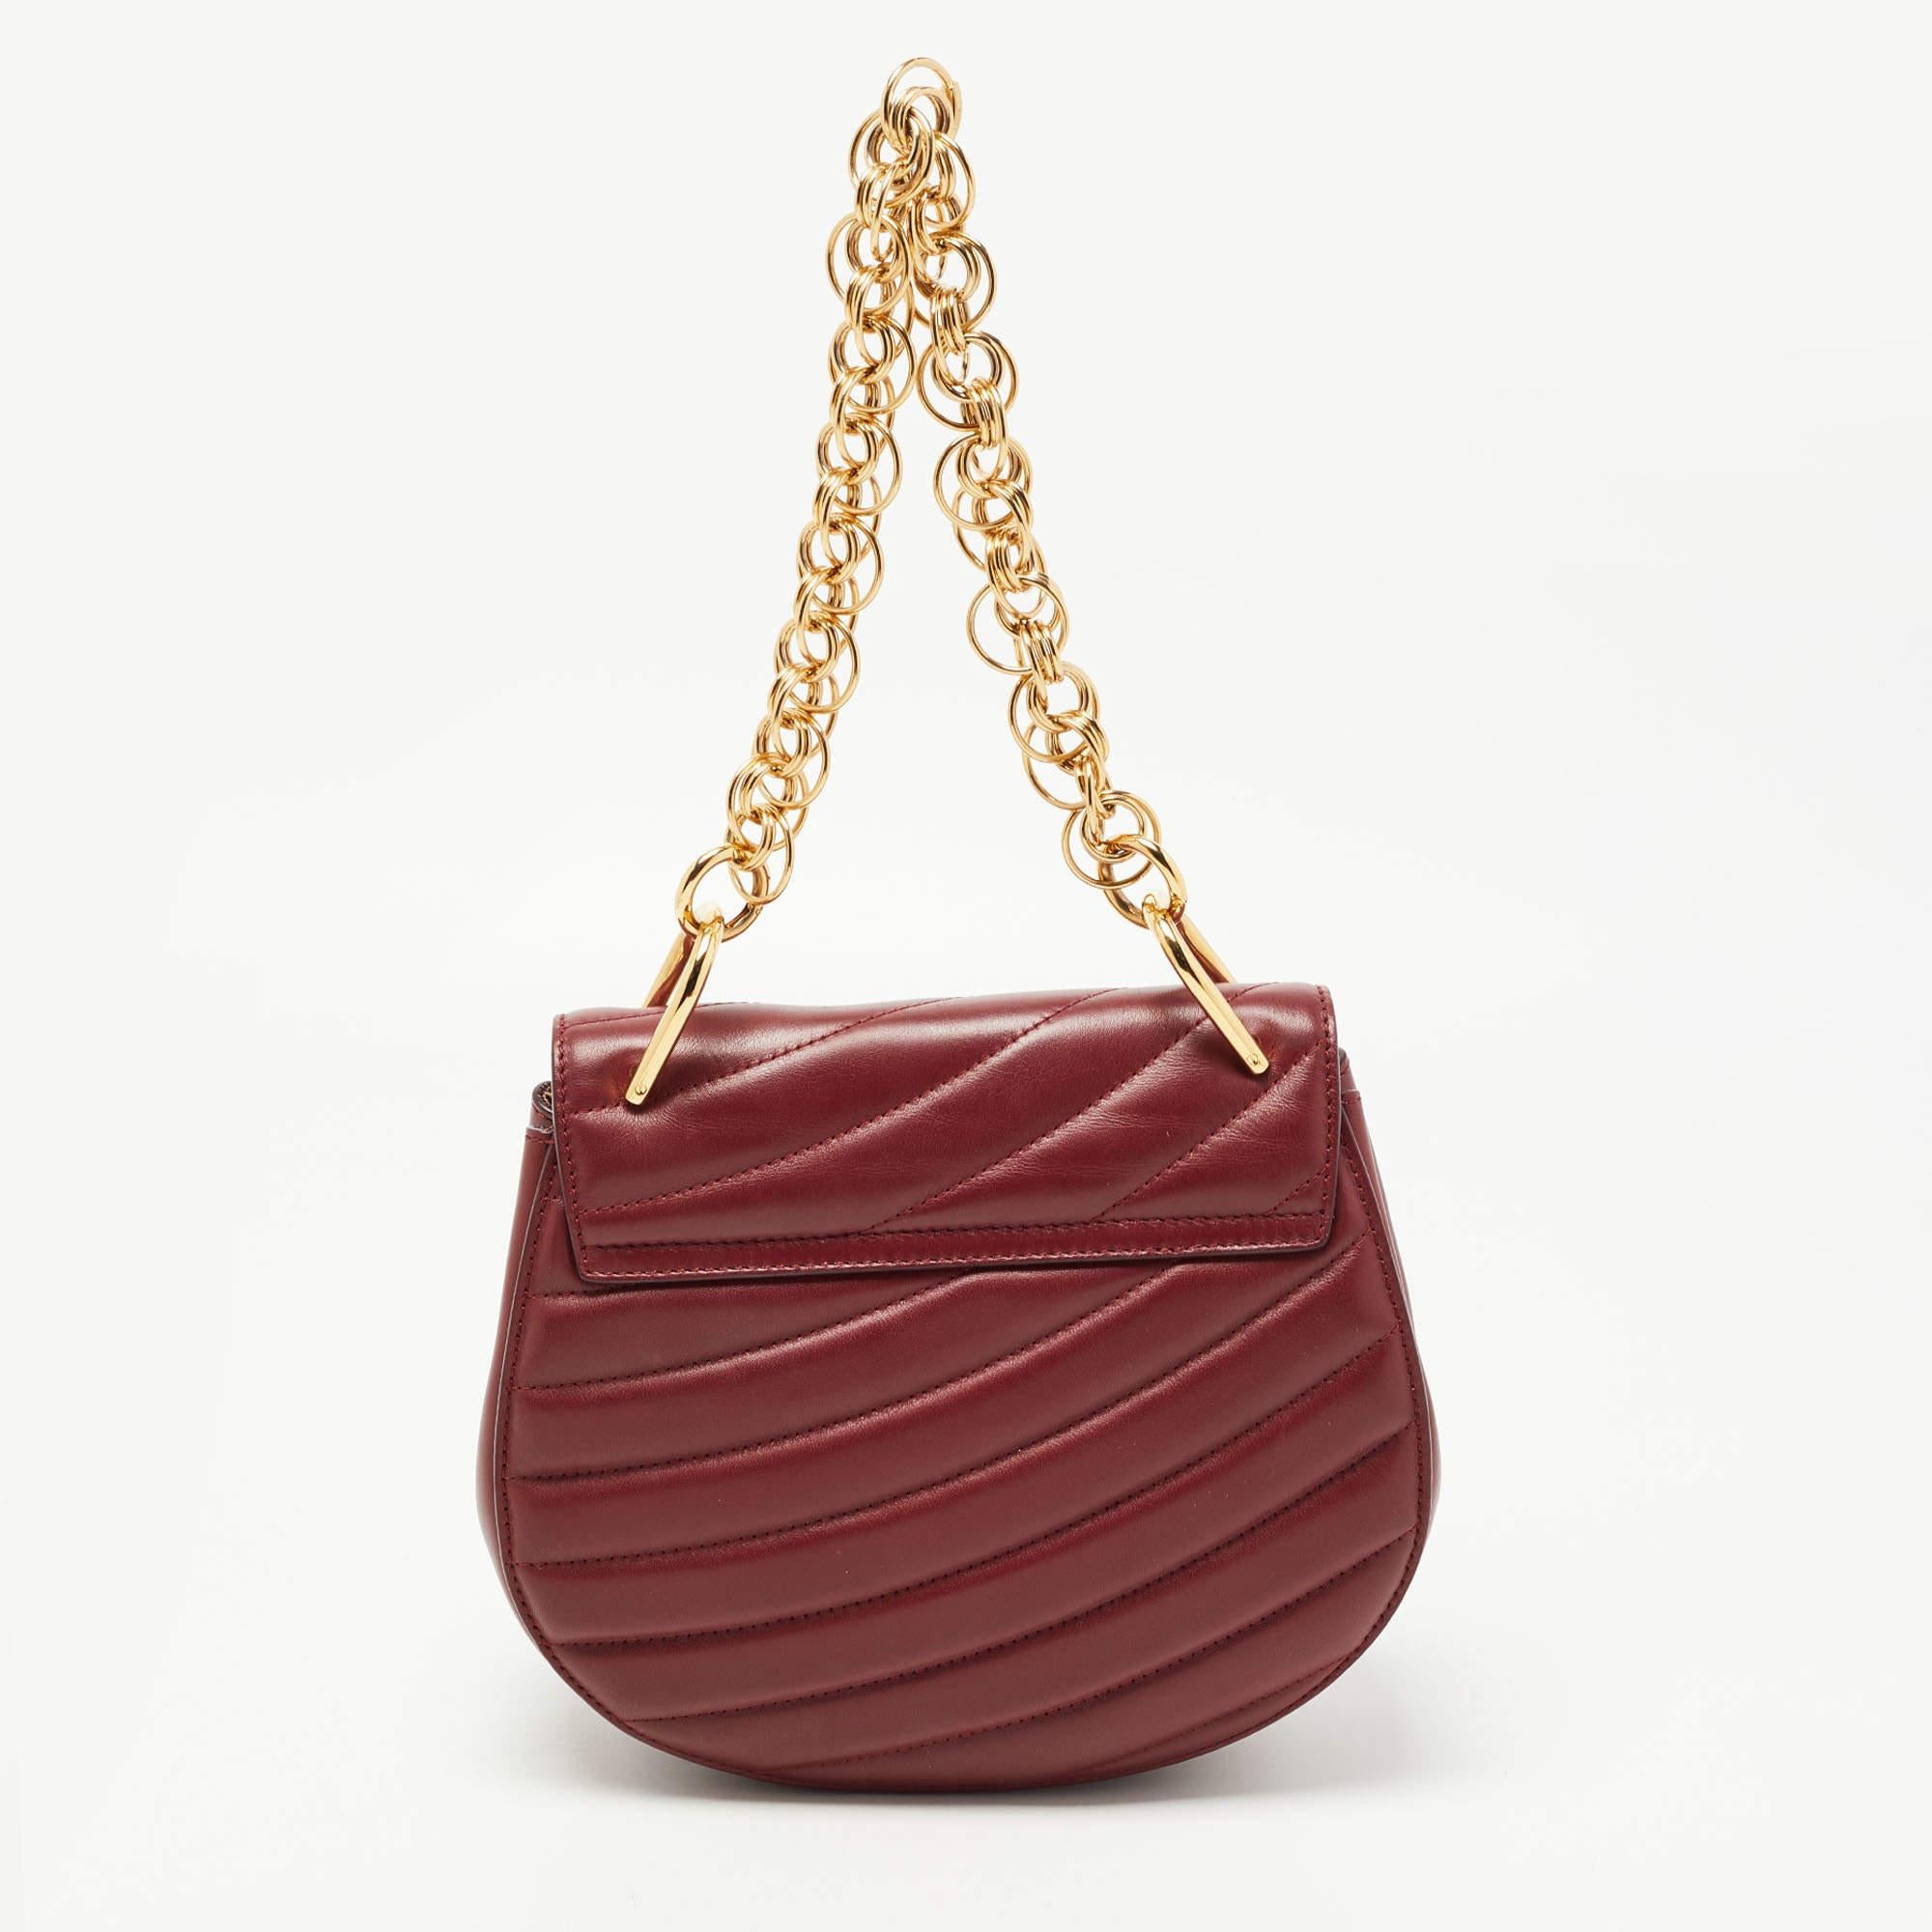 With its classic appeal and artistic design, this Chloe bag will win your heart at first sight. The gold-tone accents and the attractive patterns on the exterior of this burgundy creation make it a standout piece in your closet. Created from